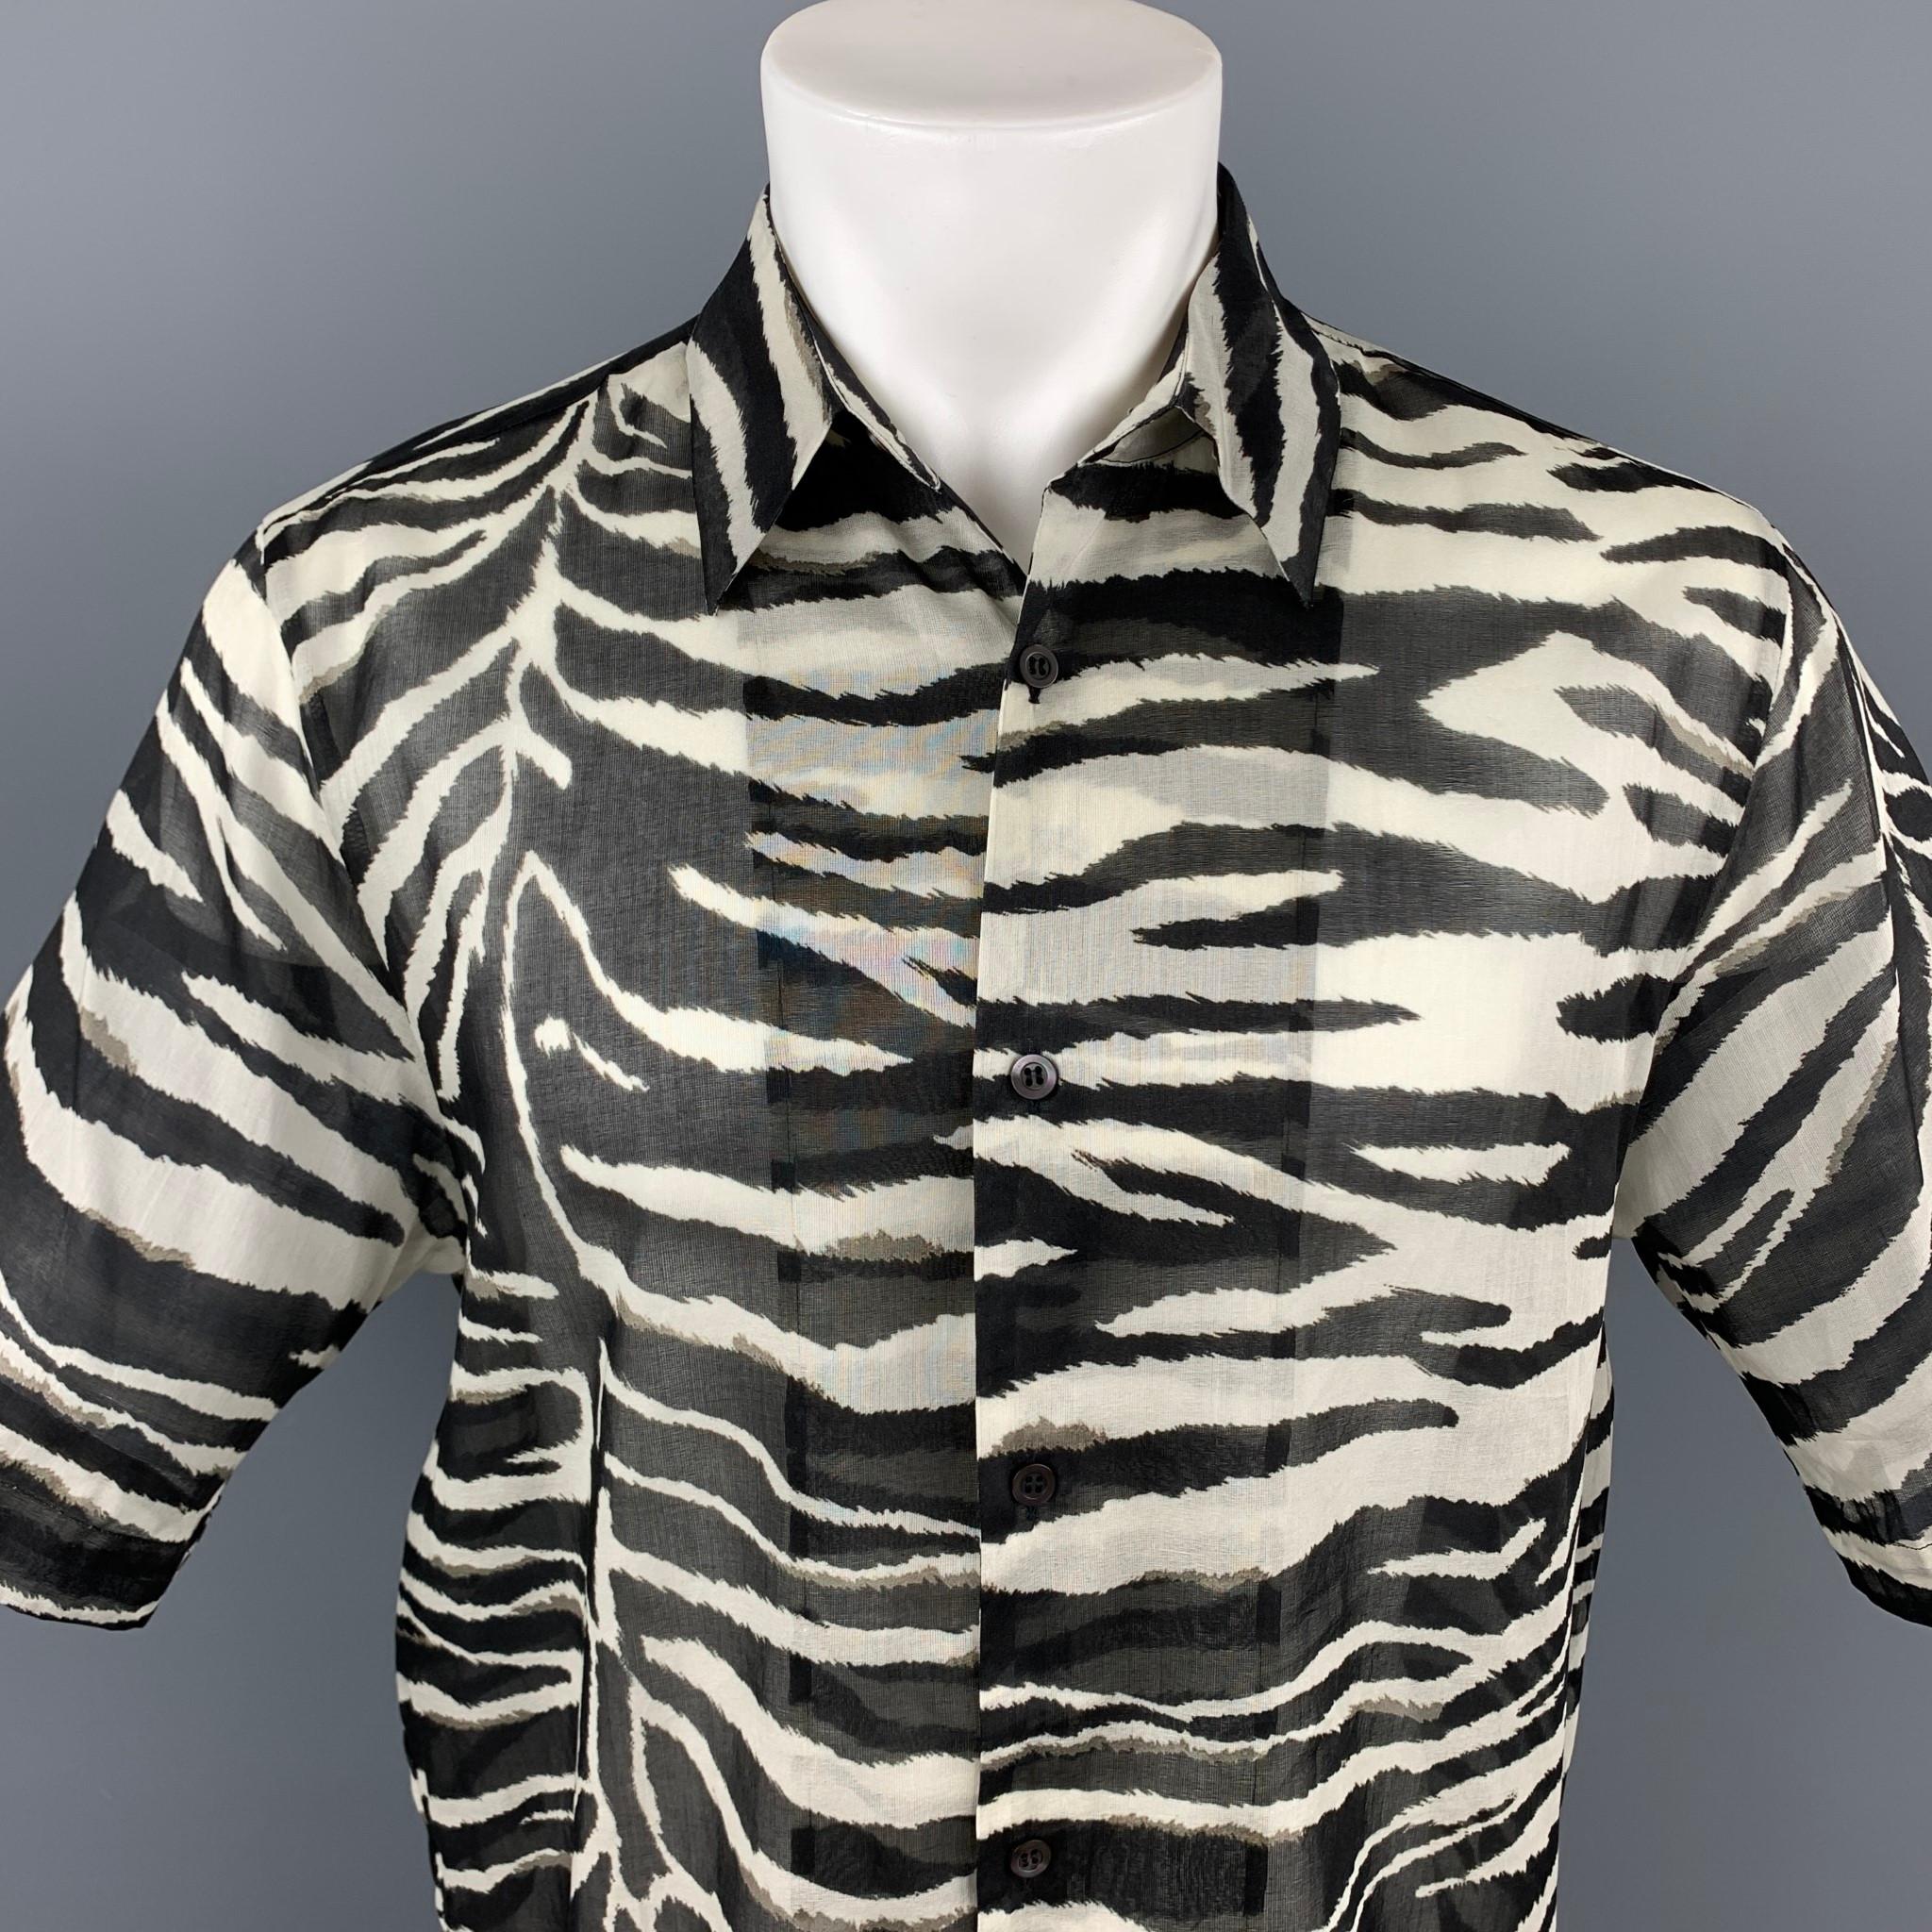 DRIES VAN NOTEN S/S 20 short sleeve shirt comes in a black & white zebra print cotton featuring a button up style and a pointed collar. Made in Portugal.

New With Tags. 
Marked: 44
Original Retail Price: $470.00

Measurements:

Shoulder: 16.5